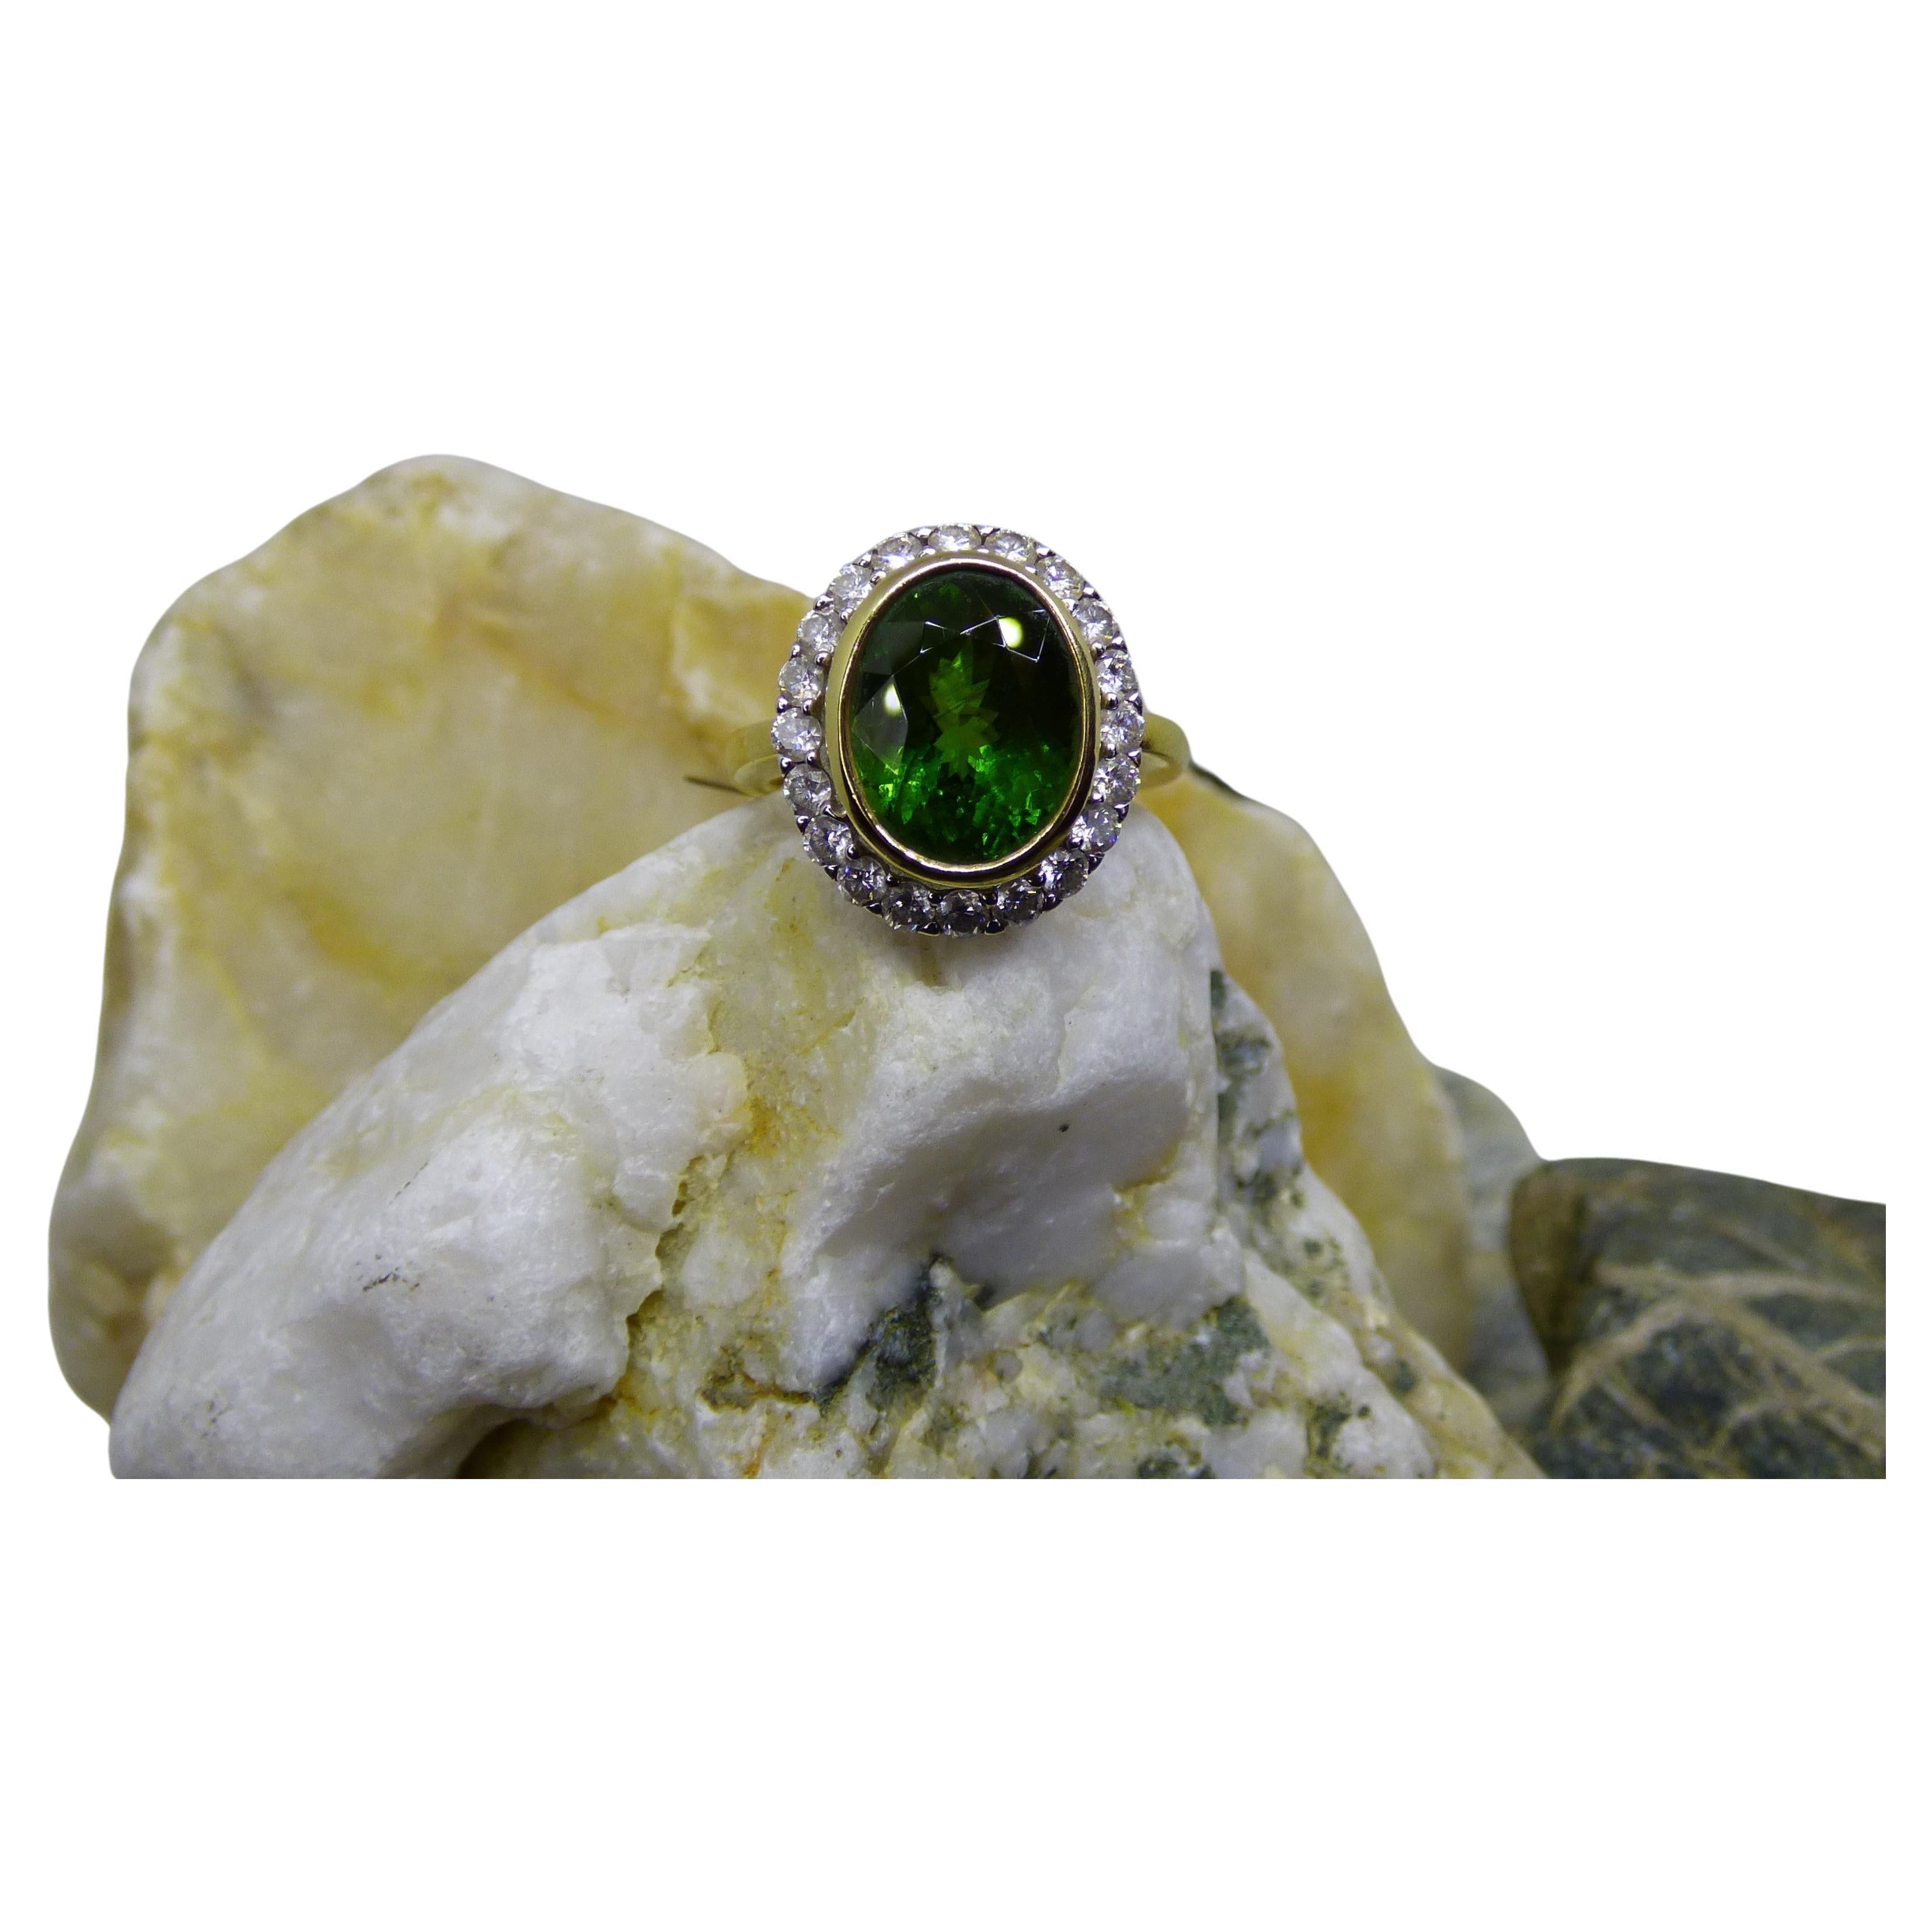 5.77ct Oval Green Tourmaline and Diamond Cluster Ring in 18K Gold. For Sale